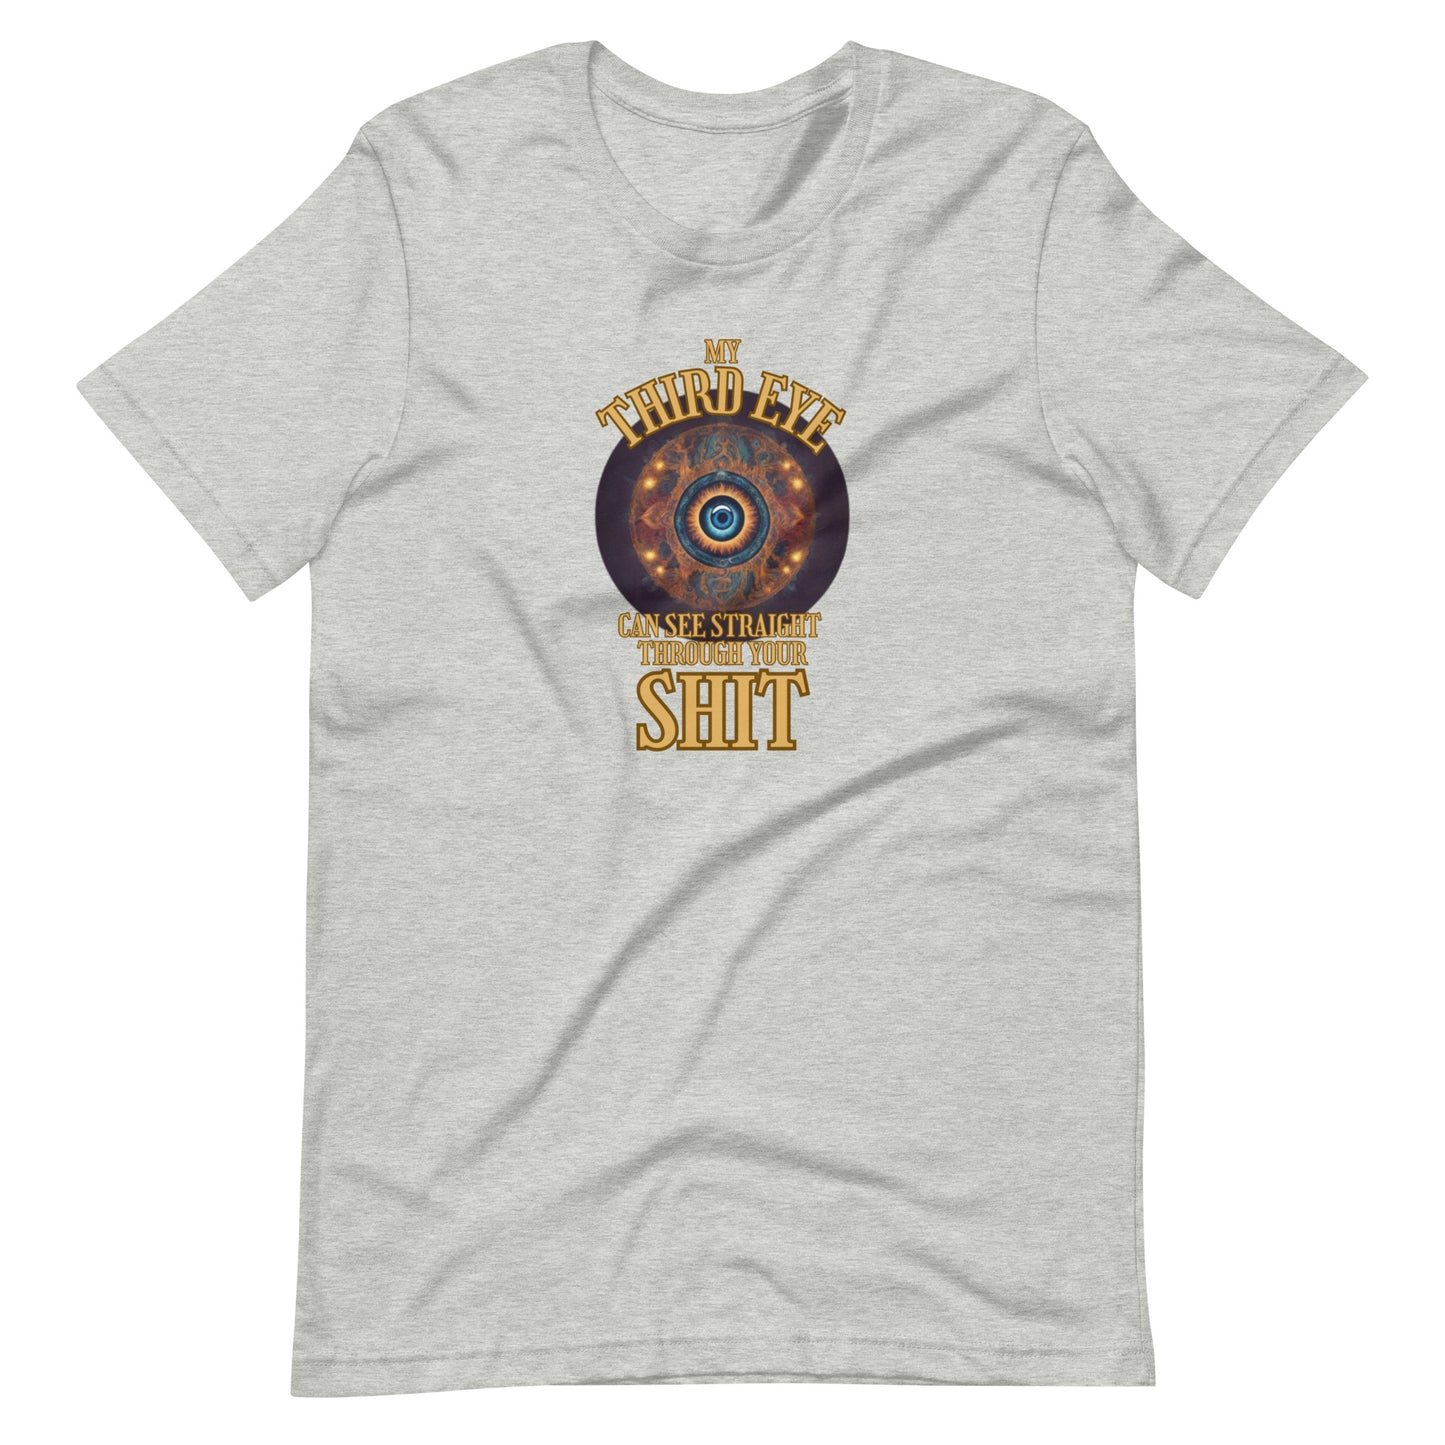 My Third Eye Can See Straight Through Your Shit Unisex t-shirt